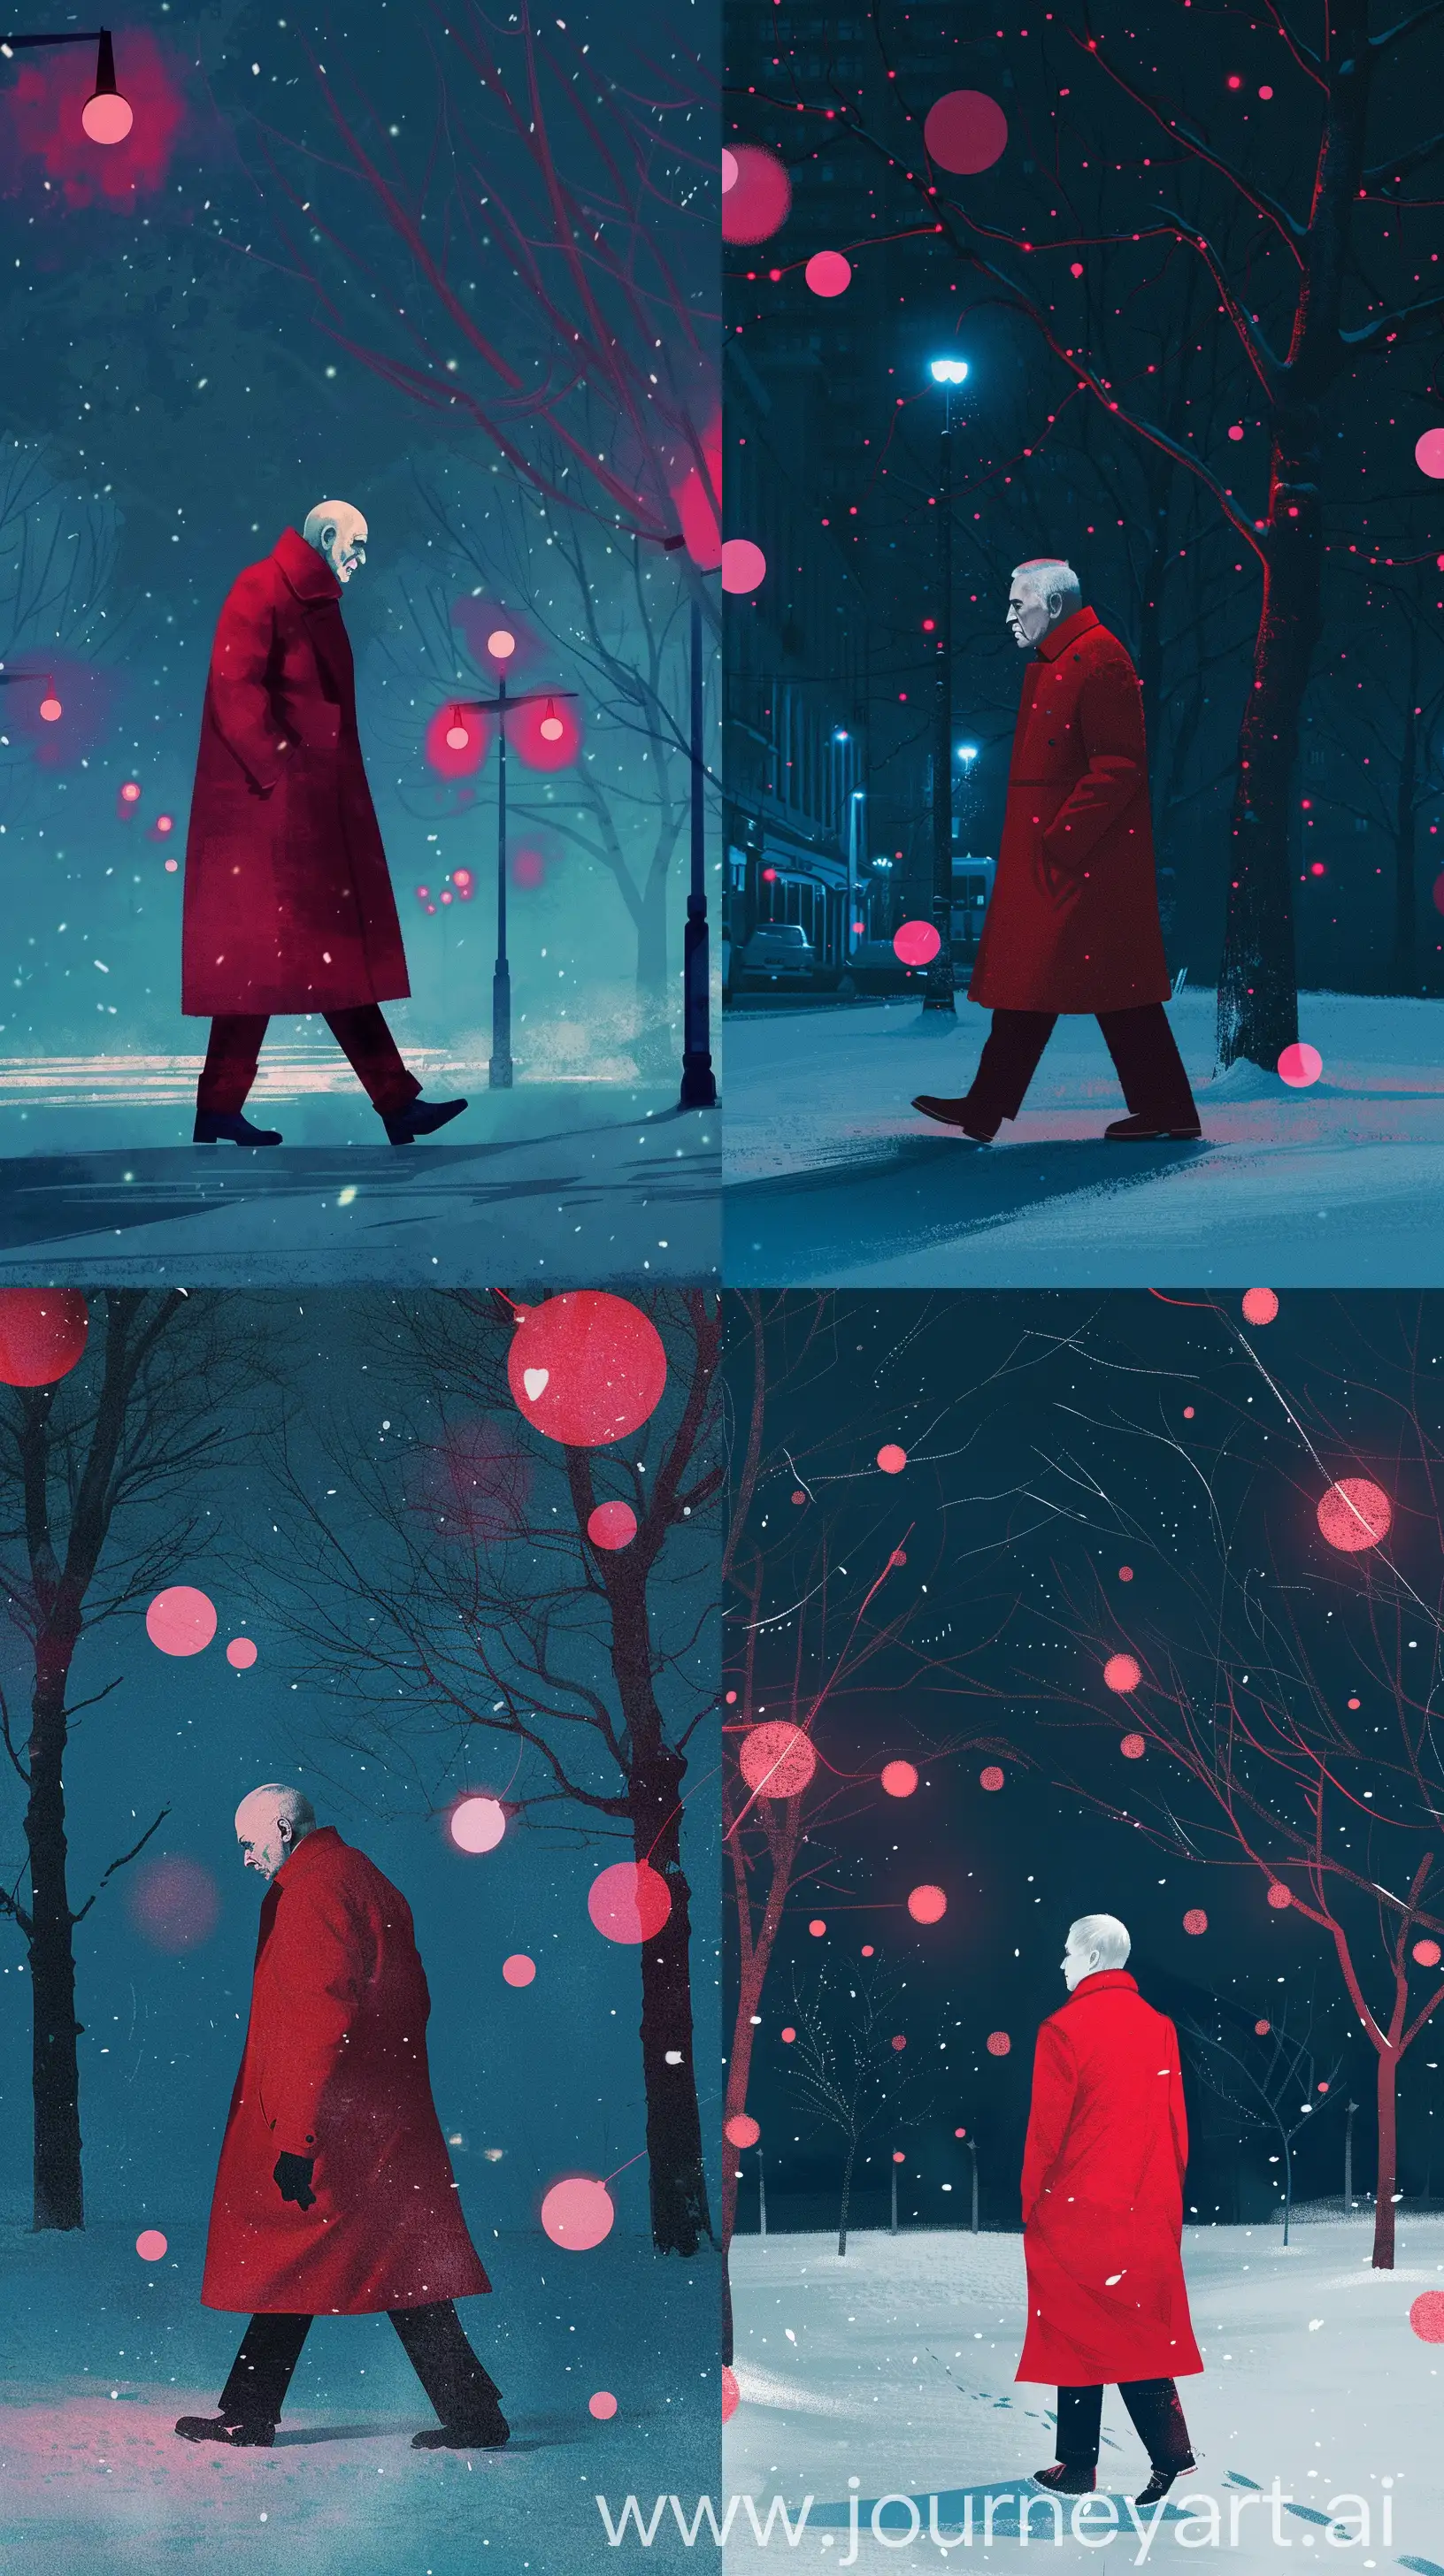 Night-Stroll-Vintage-Man-in-Red-Coat-Amid-Pink-and-Blue-Lights